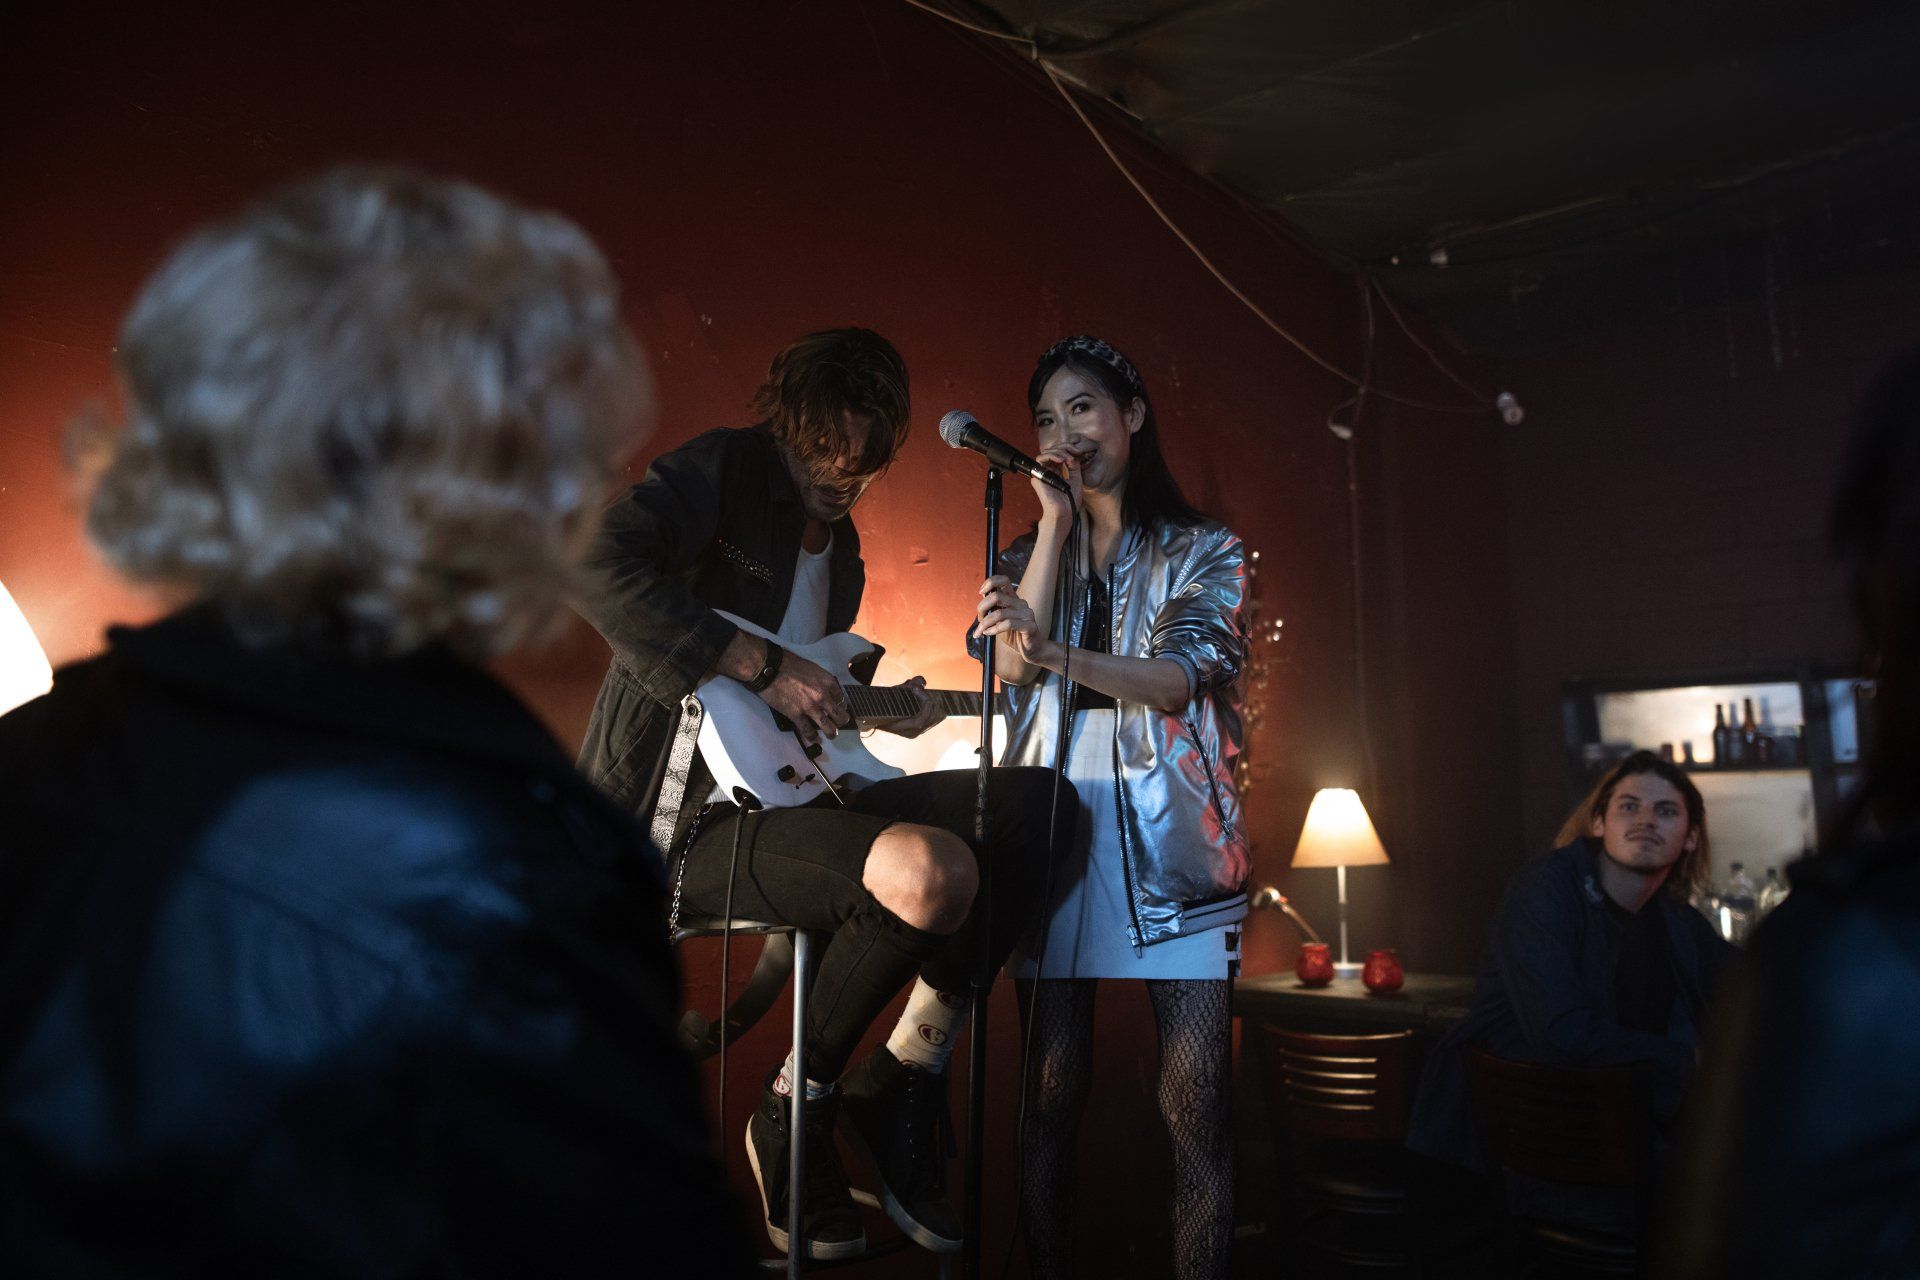 A man is playing a guitar and a woman is singing into a microphone.